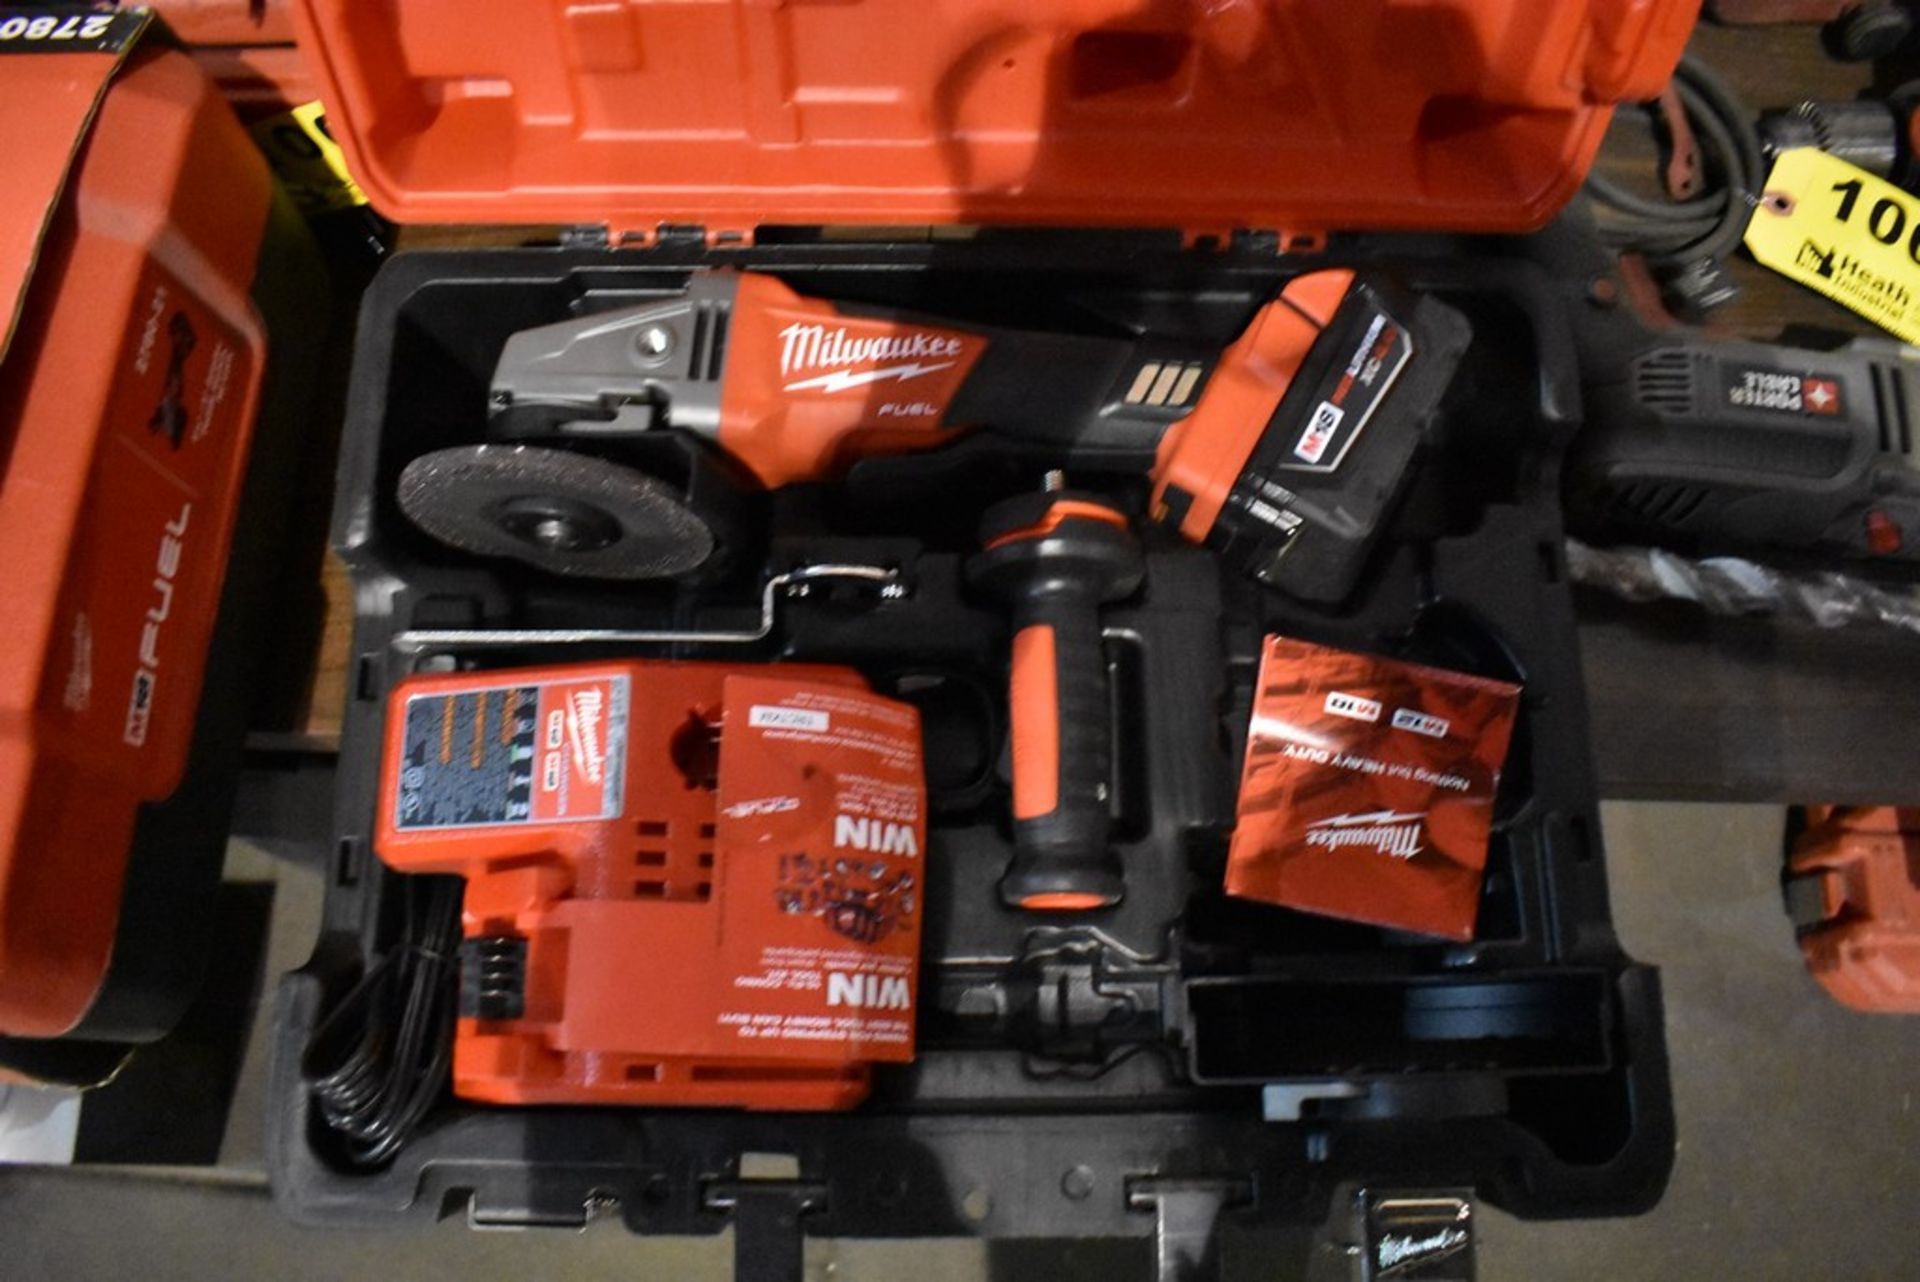 MILWAUKEE M18 FUEL CORDLESS ANGLE GRINDER, M18 4.0 LITHIUM BATTERY, CHARGER IN CASE - Image 3 of 3